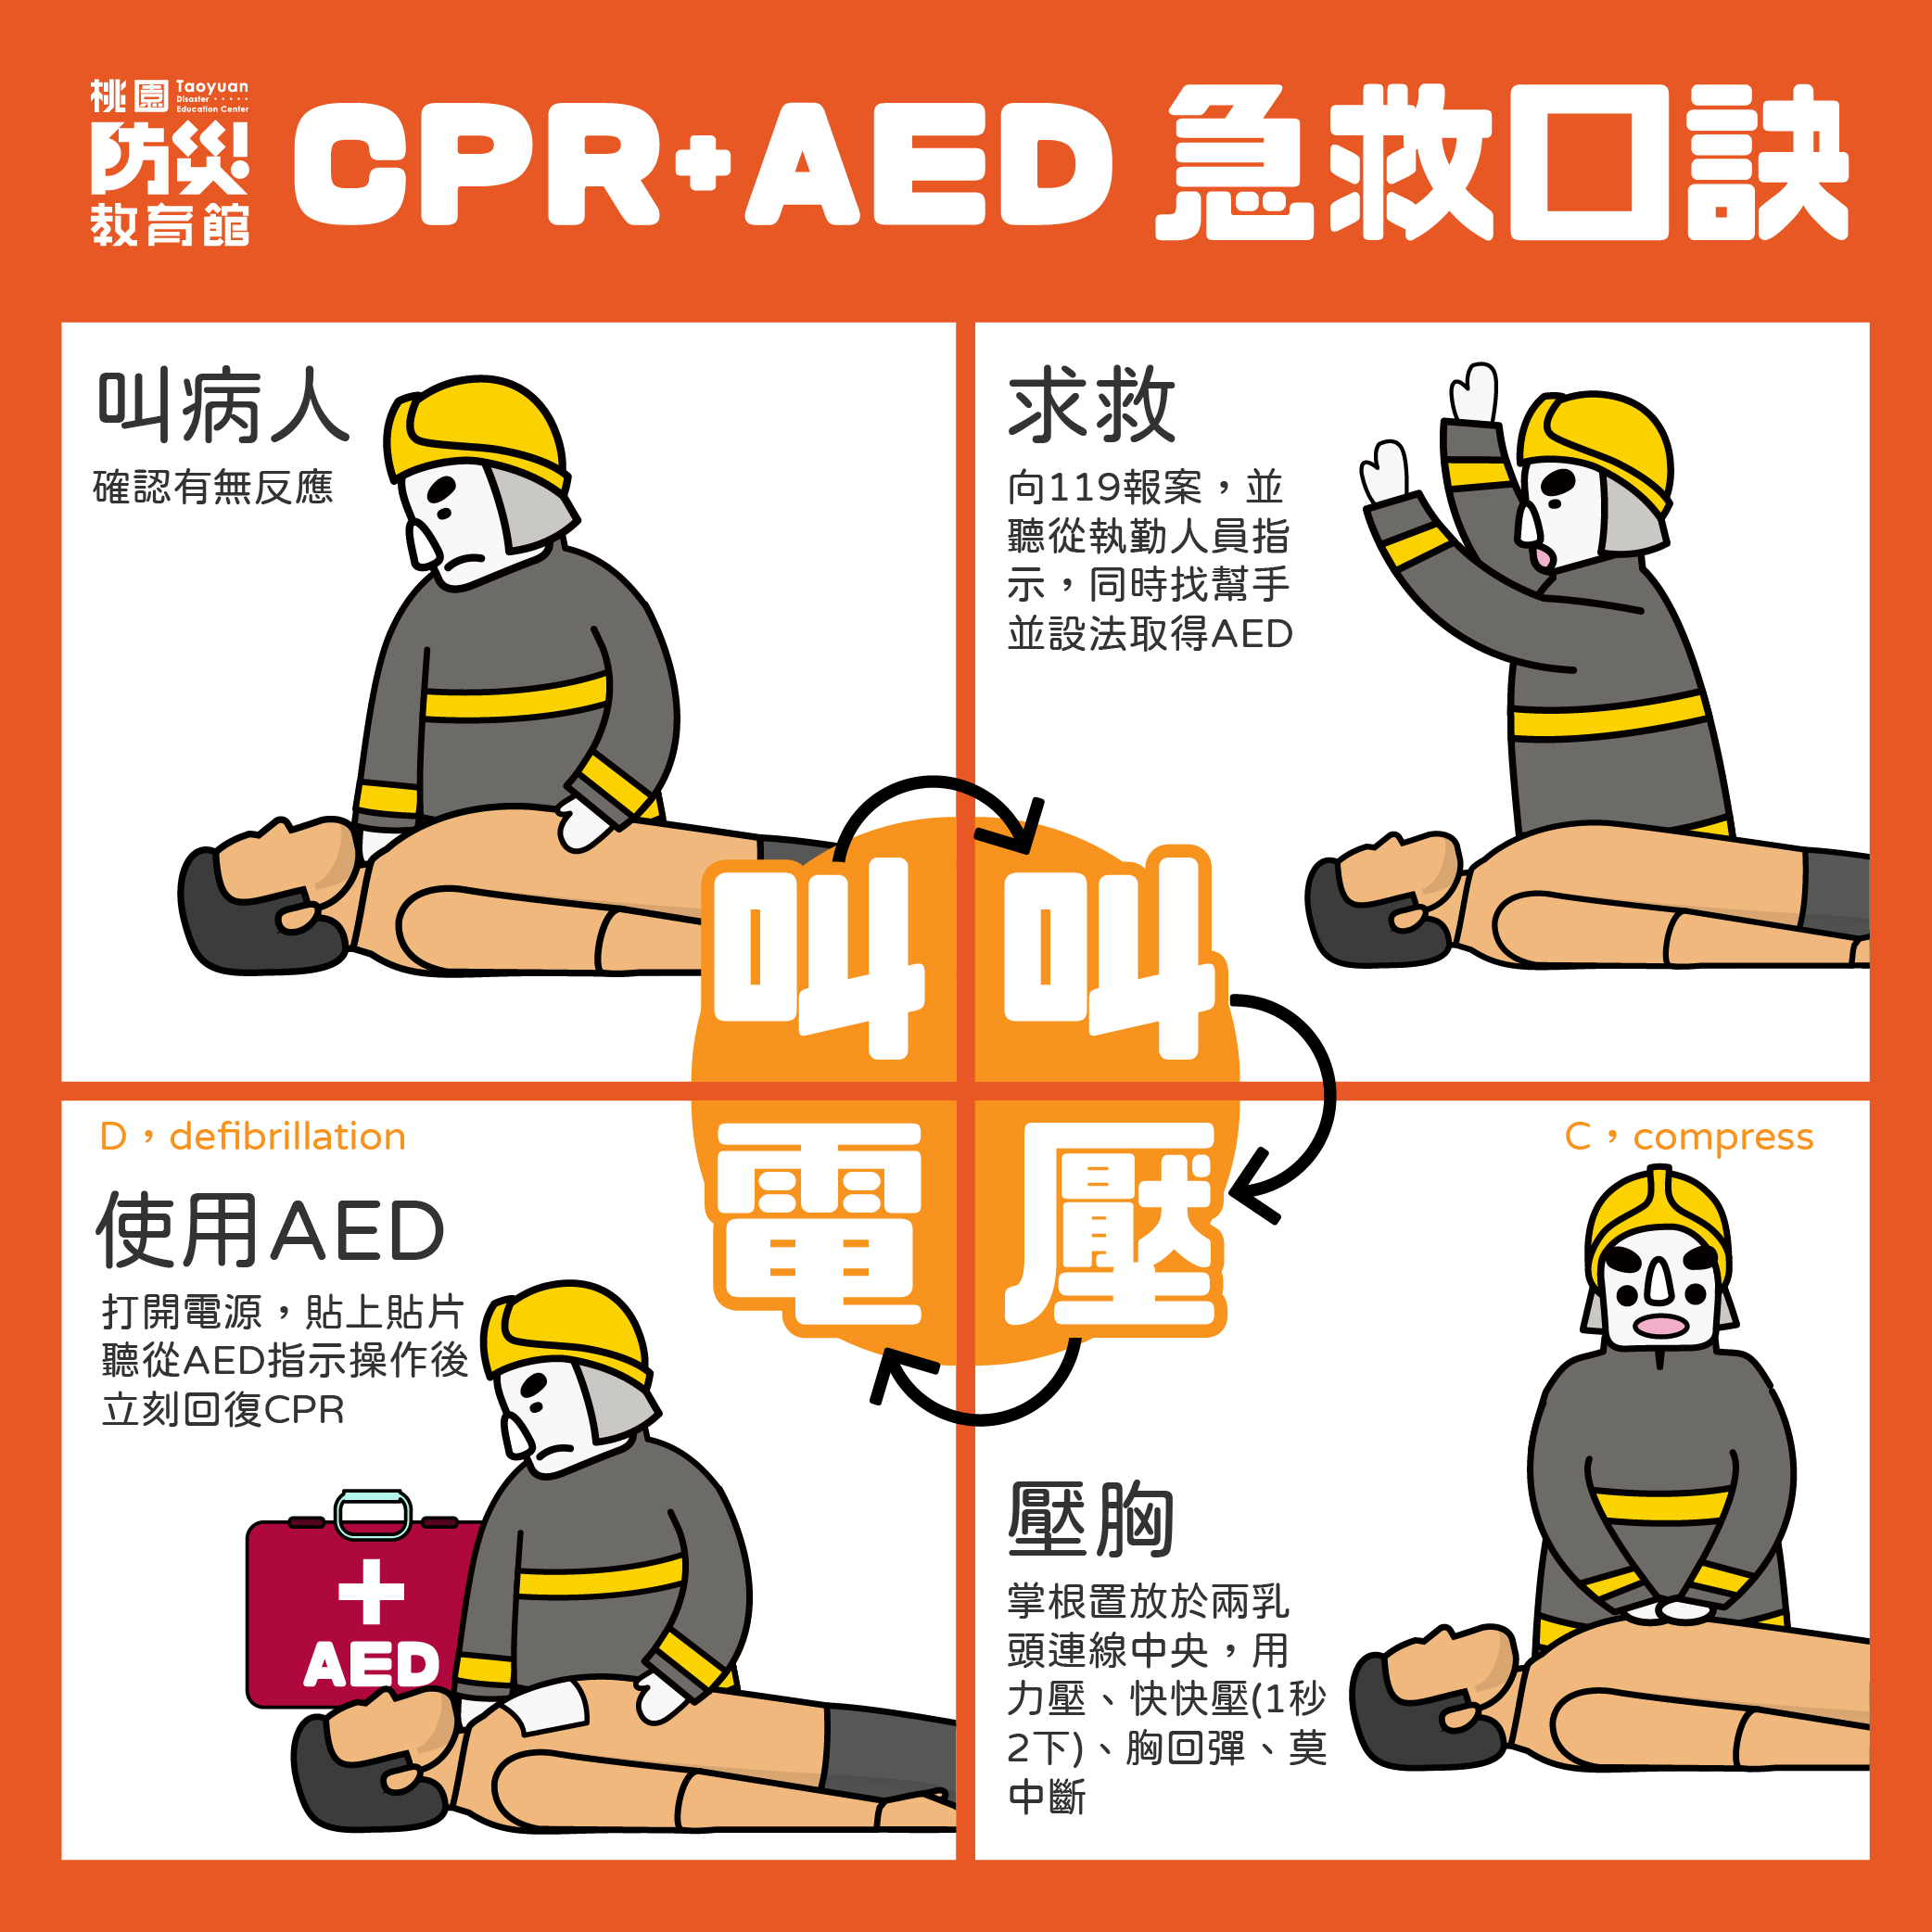 CPR+AED photo